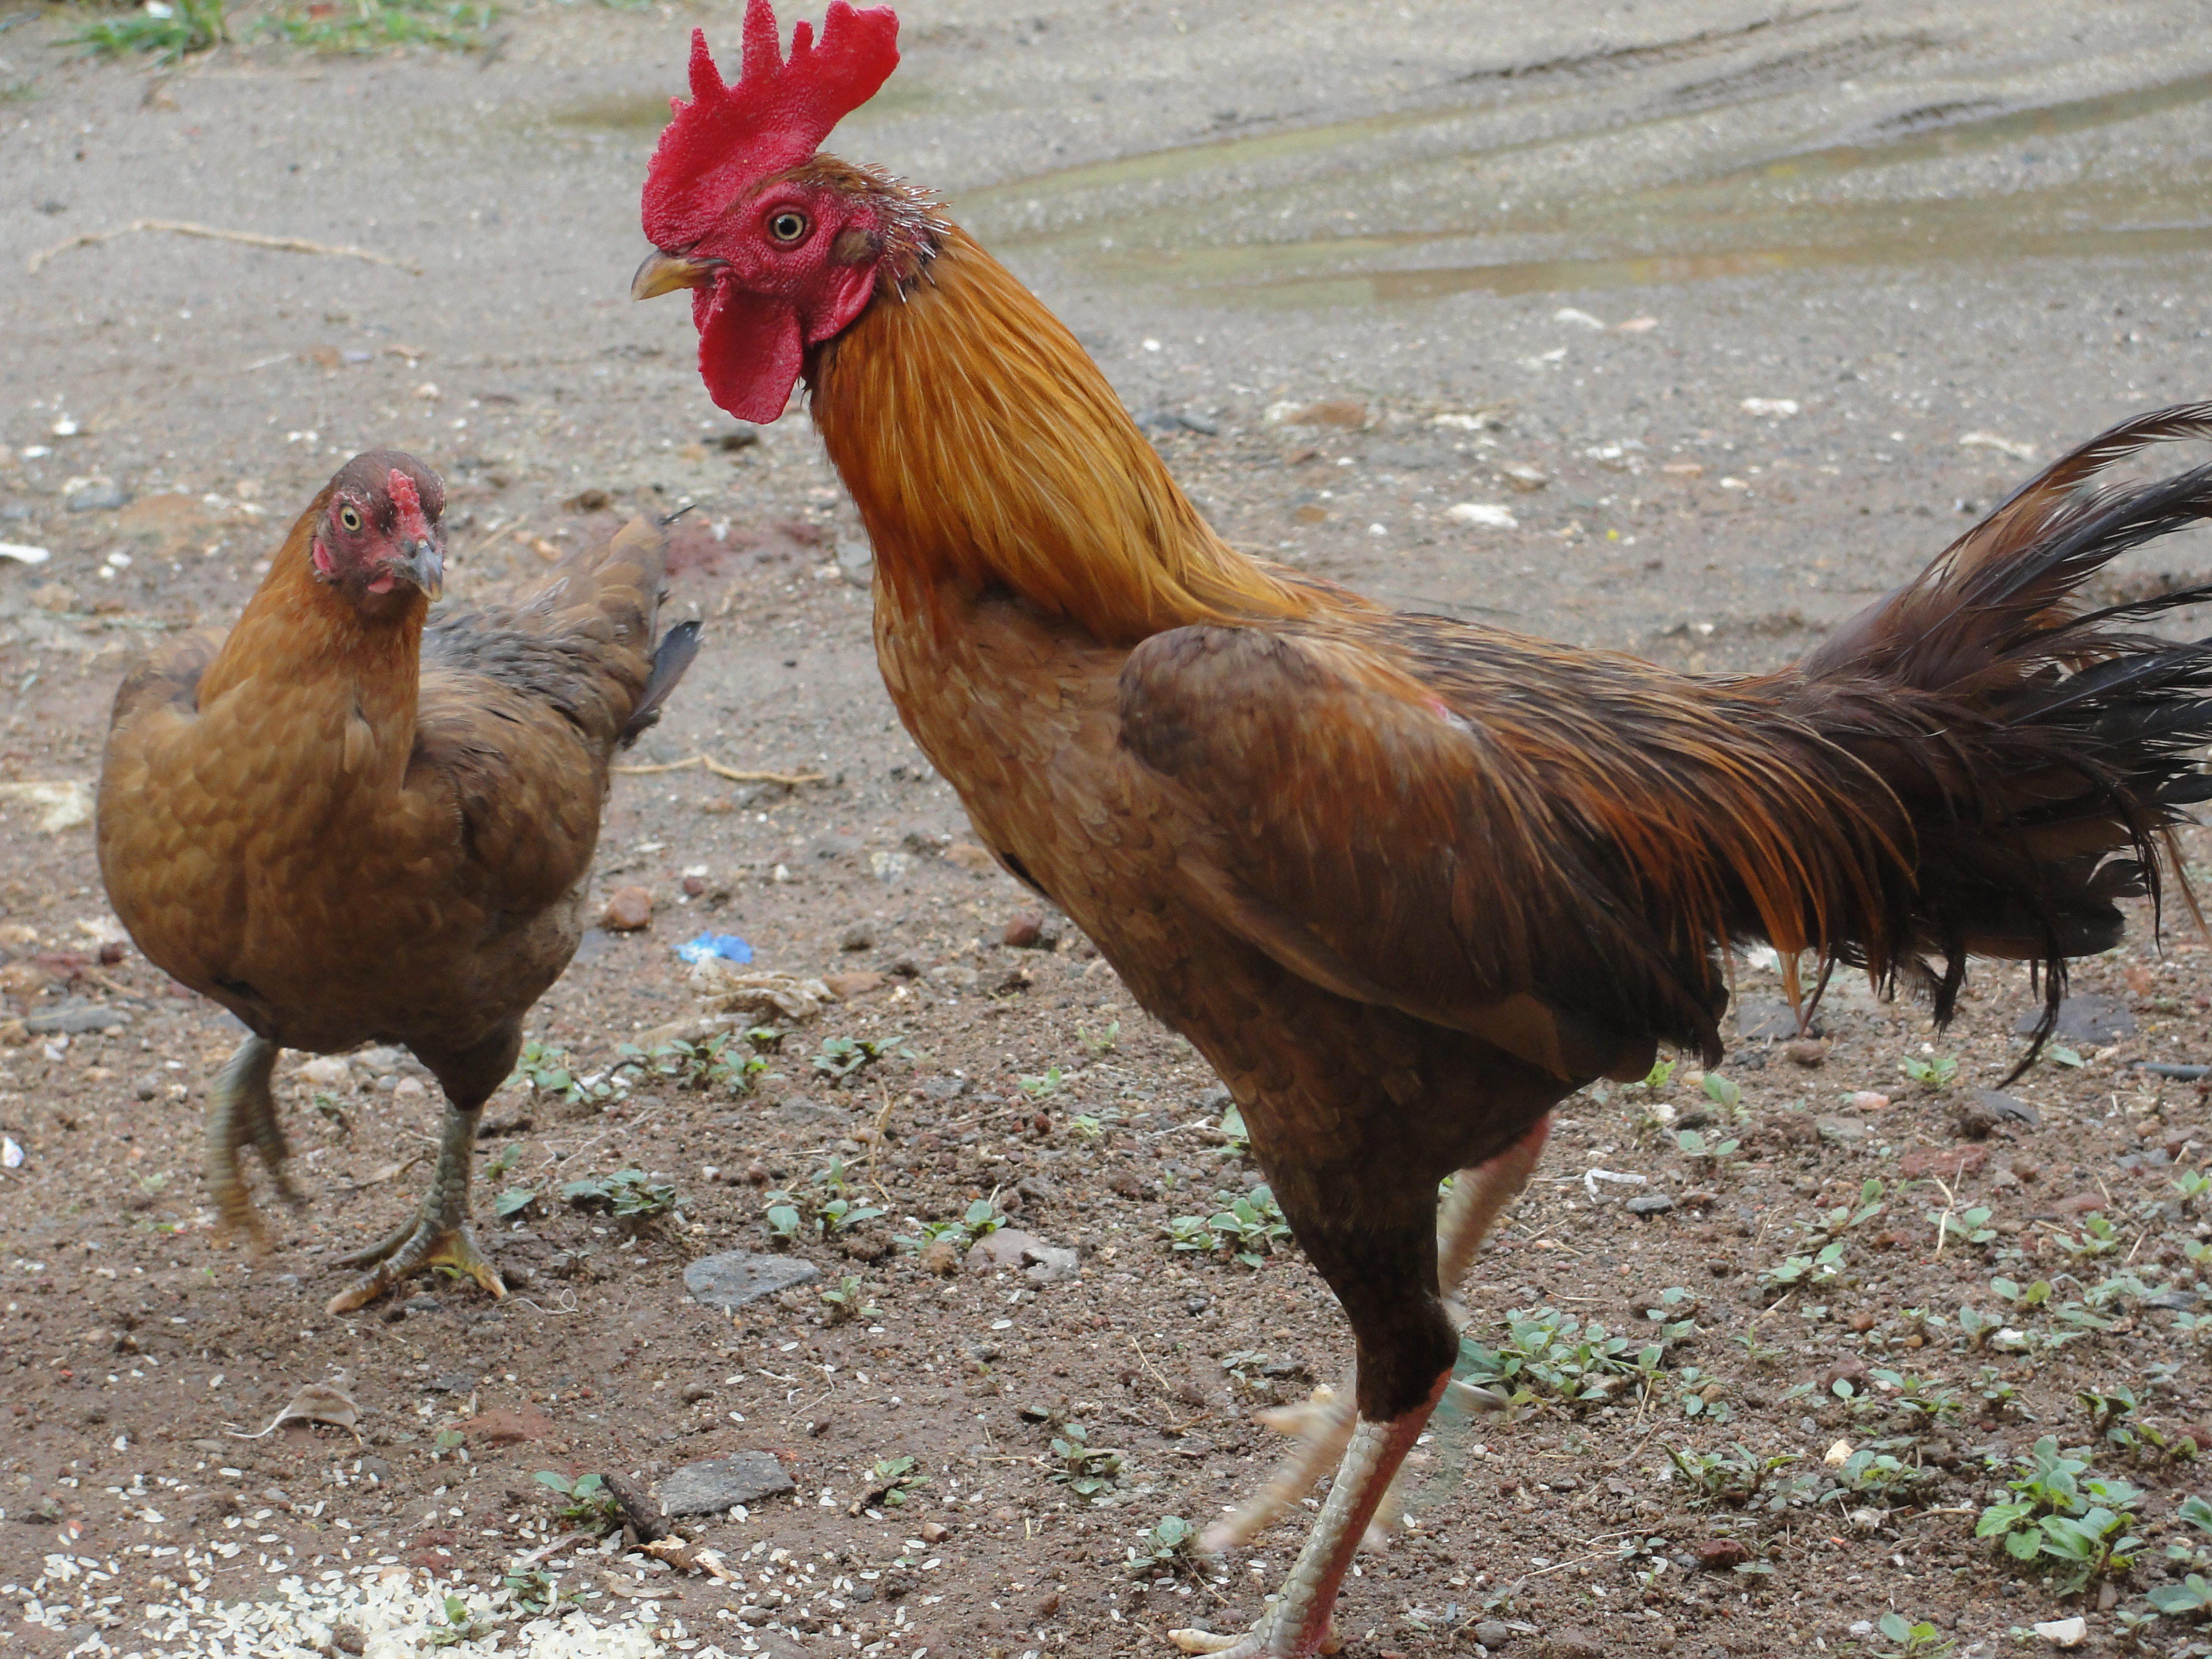 File:Rooster and hen.jpg - Wikimedia Commons